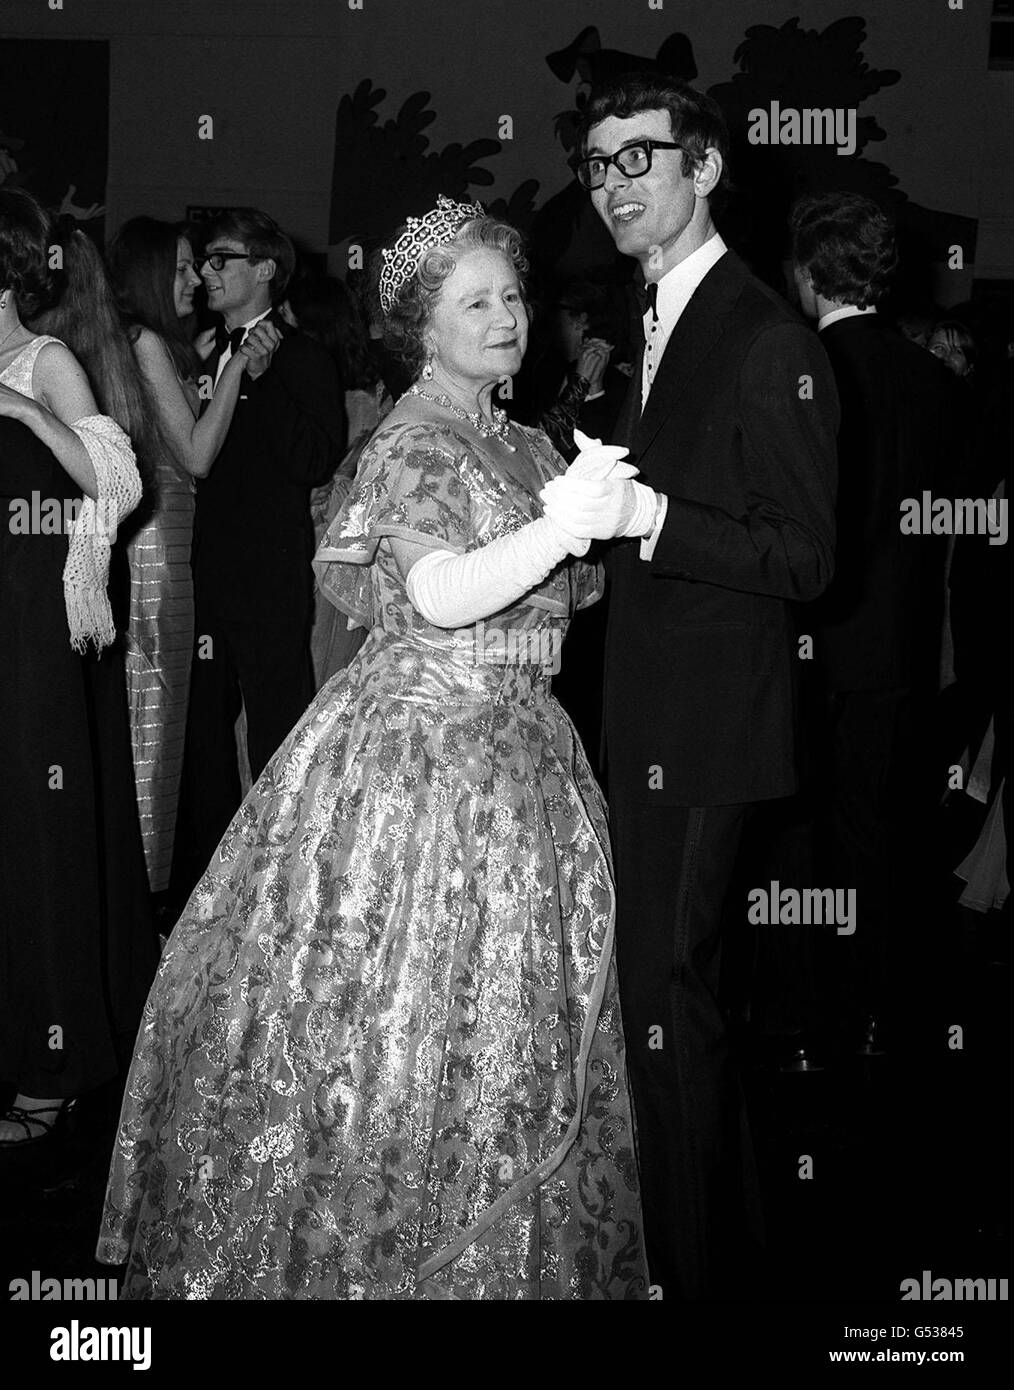 The Queen Mother, as Chancellor of London University, attending the Students Union Commemoration Ball at Queen Elizabeth College, Kensington, London. Stock Photo